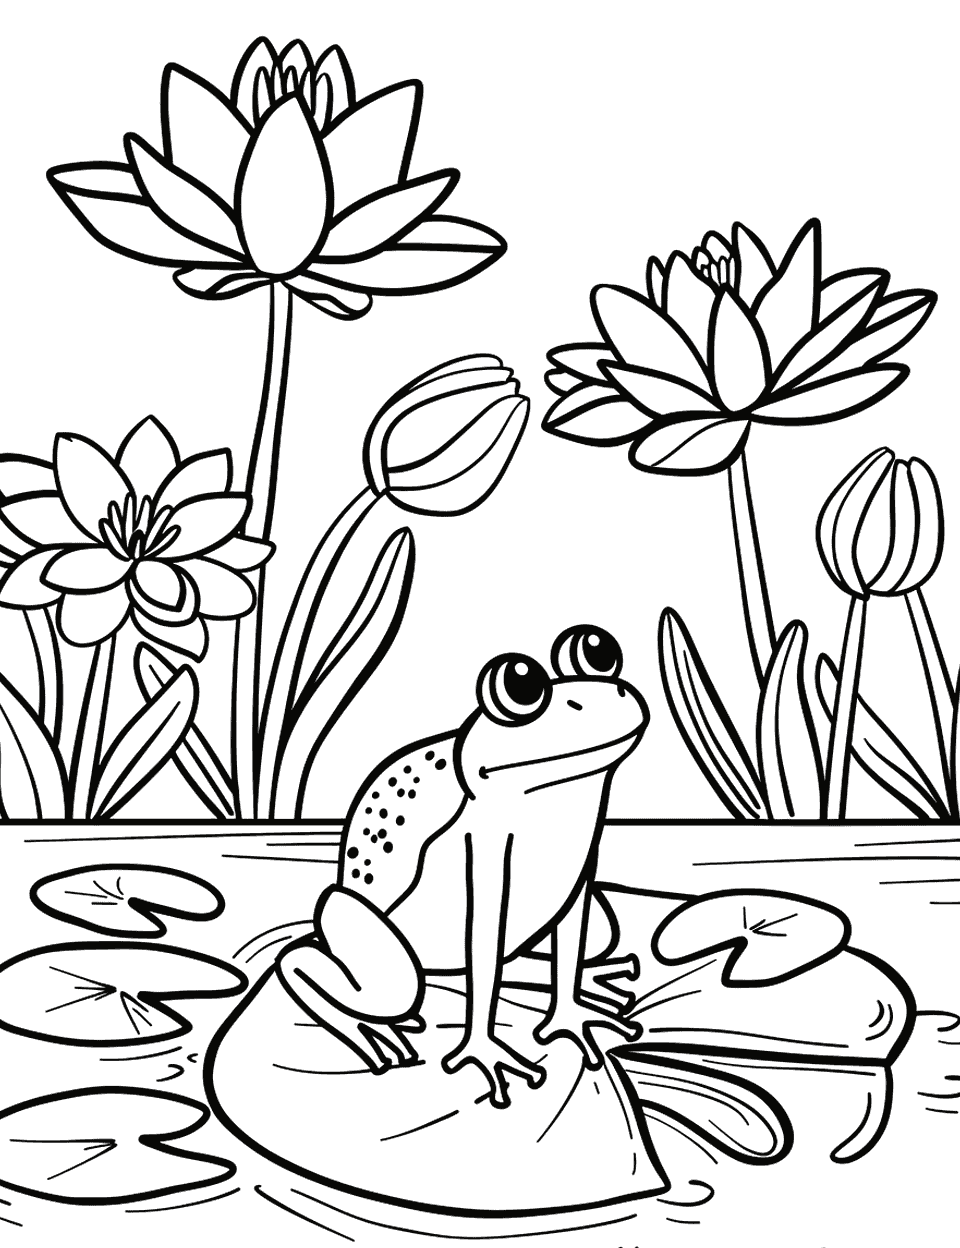 Frog on a Lily Pad Garden Coloring Page - A frog sitting on a lily pad in a small pond with water lilies around.